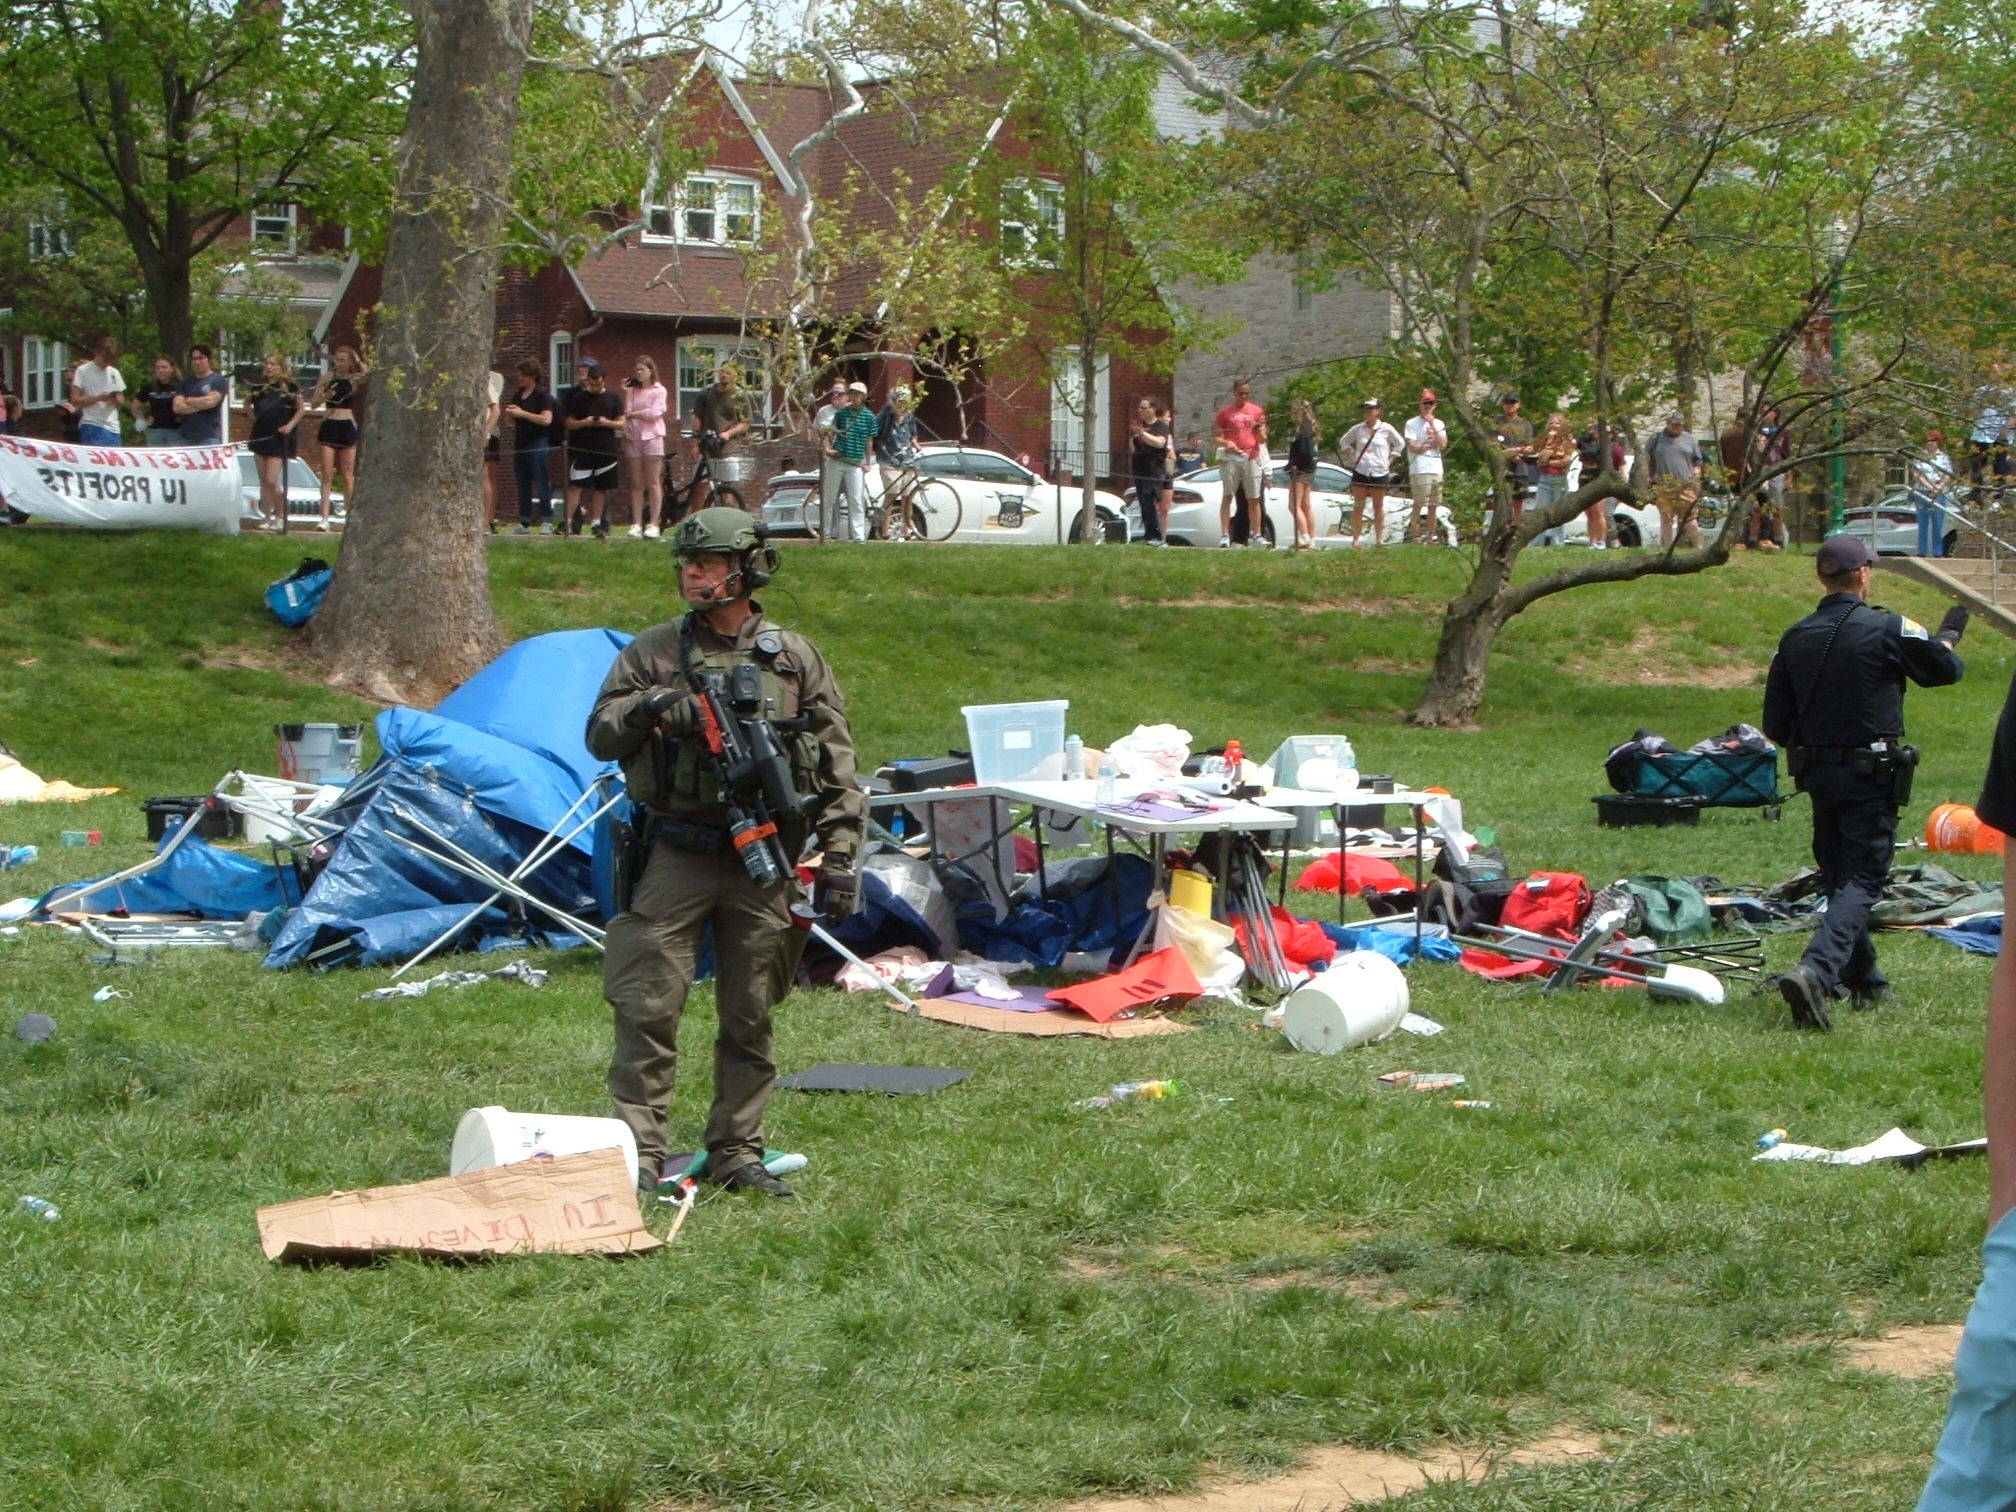 A SWAT officer stands in front of the detritus of the camp destroyed just minutes earlier.